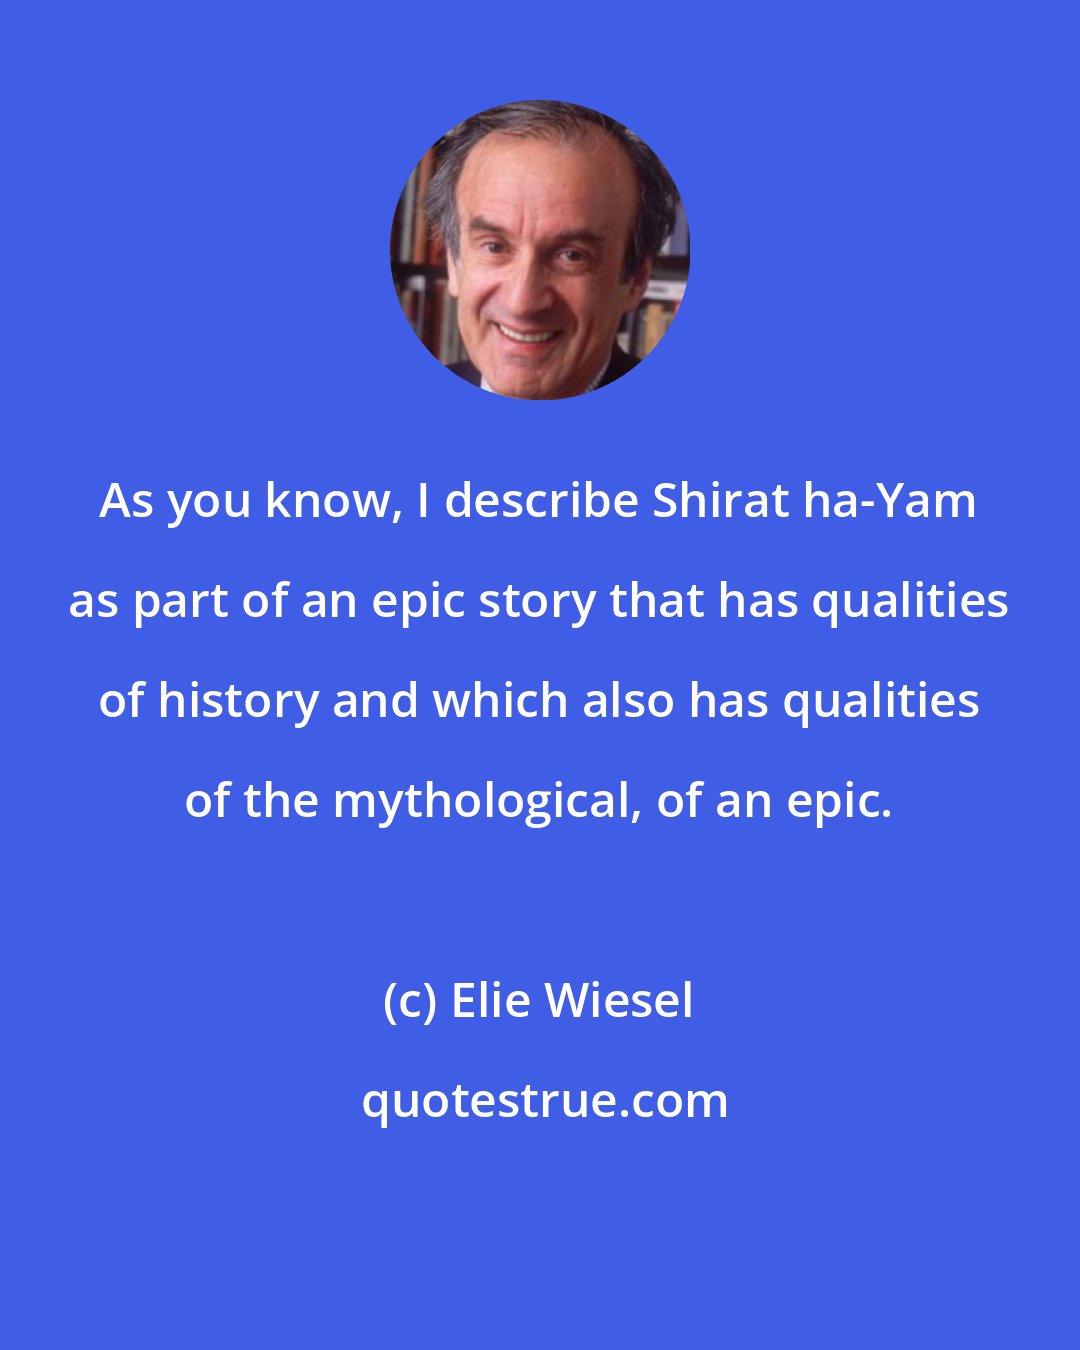 Elie Wiesel: As you know, I describe Shirat ha-Yam as part of an epic story that has qualities of history and which also has qualities of the mythological, of an epic.